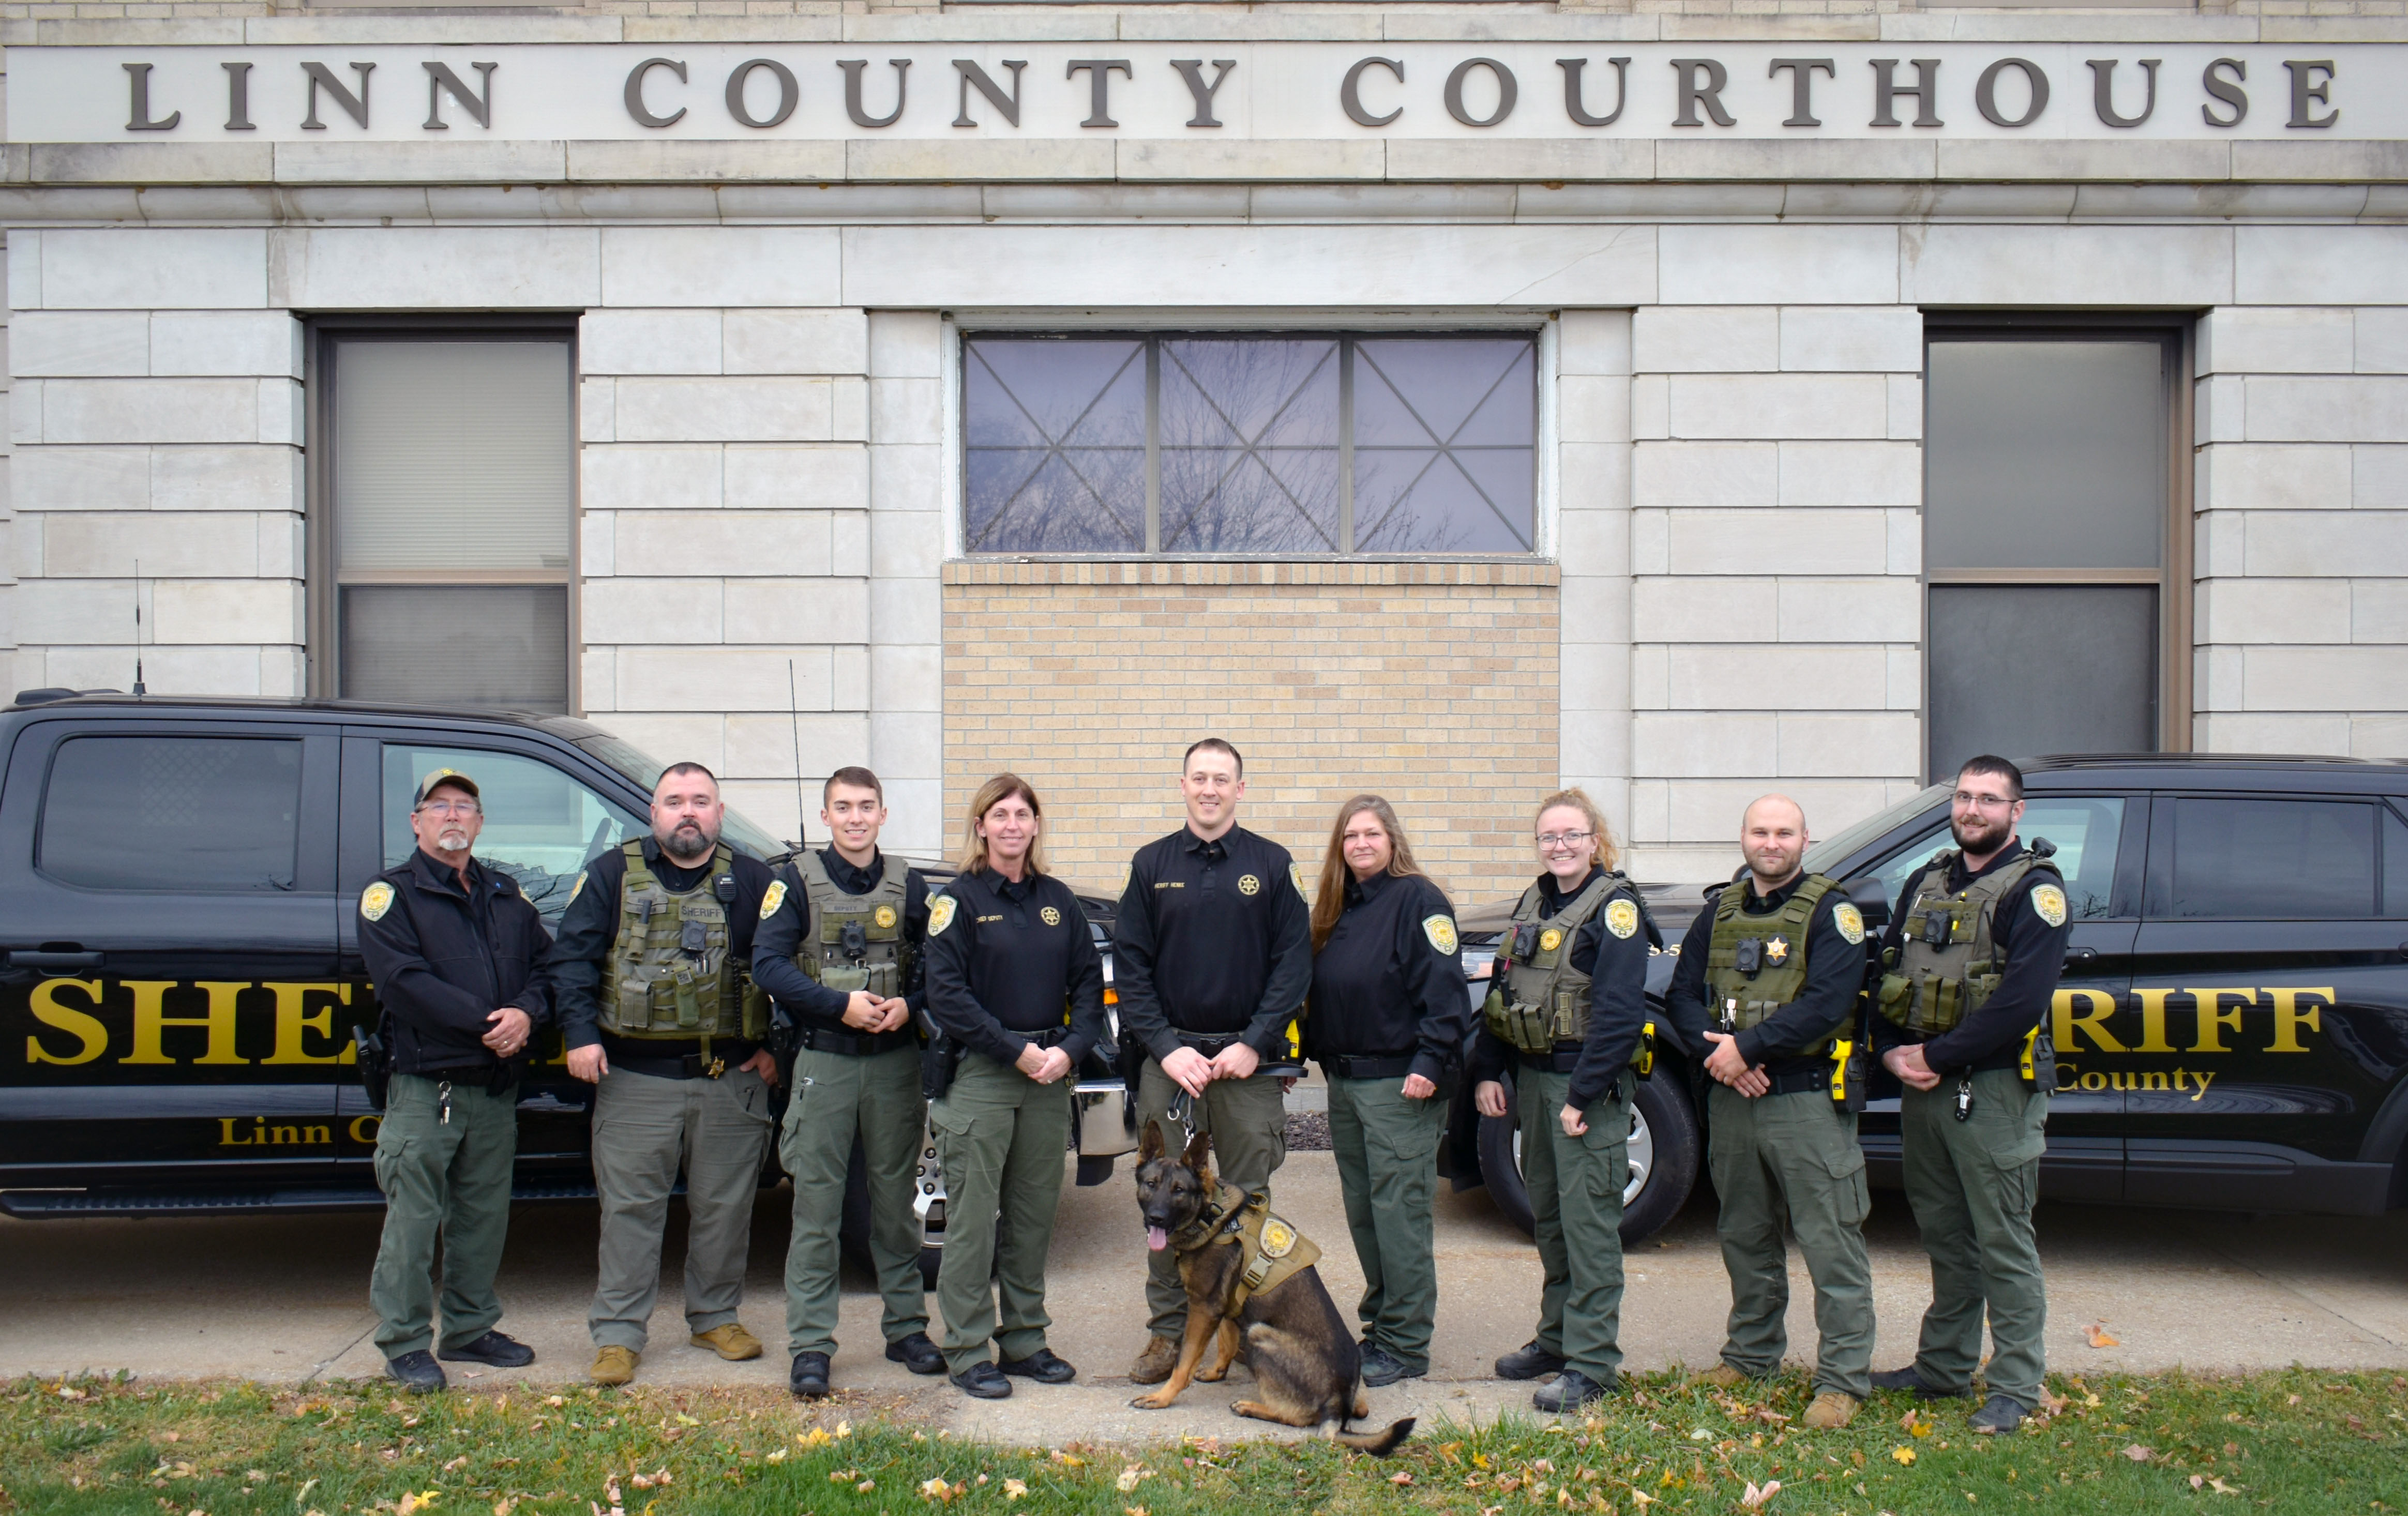 Linn County Sheriff's Office staff standing in front of the courthouse